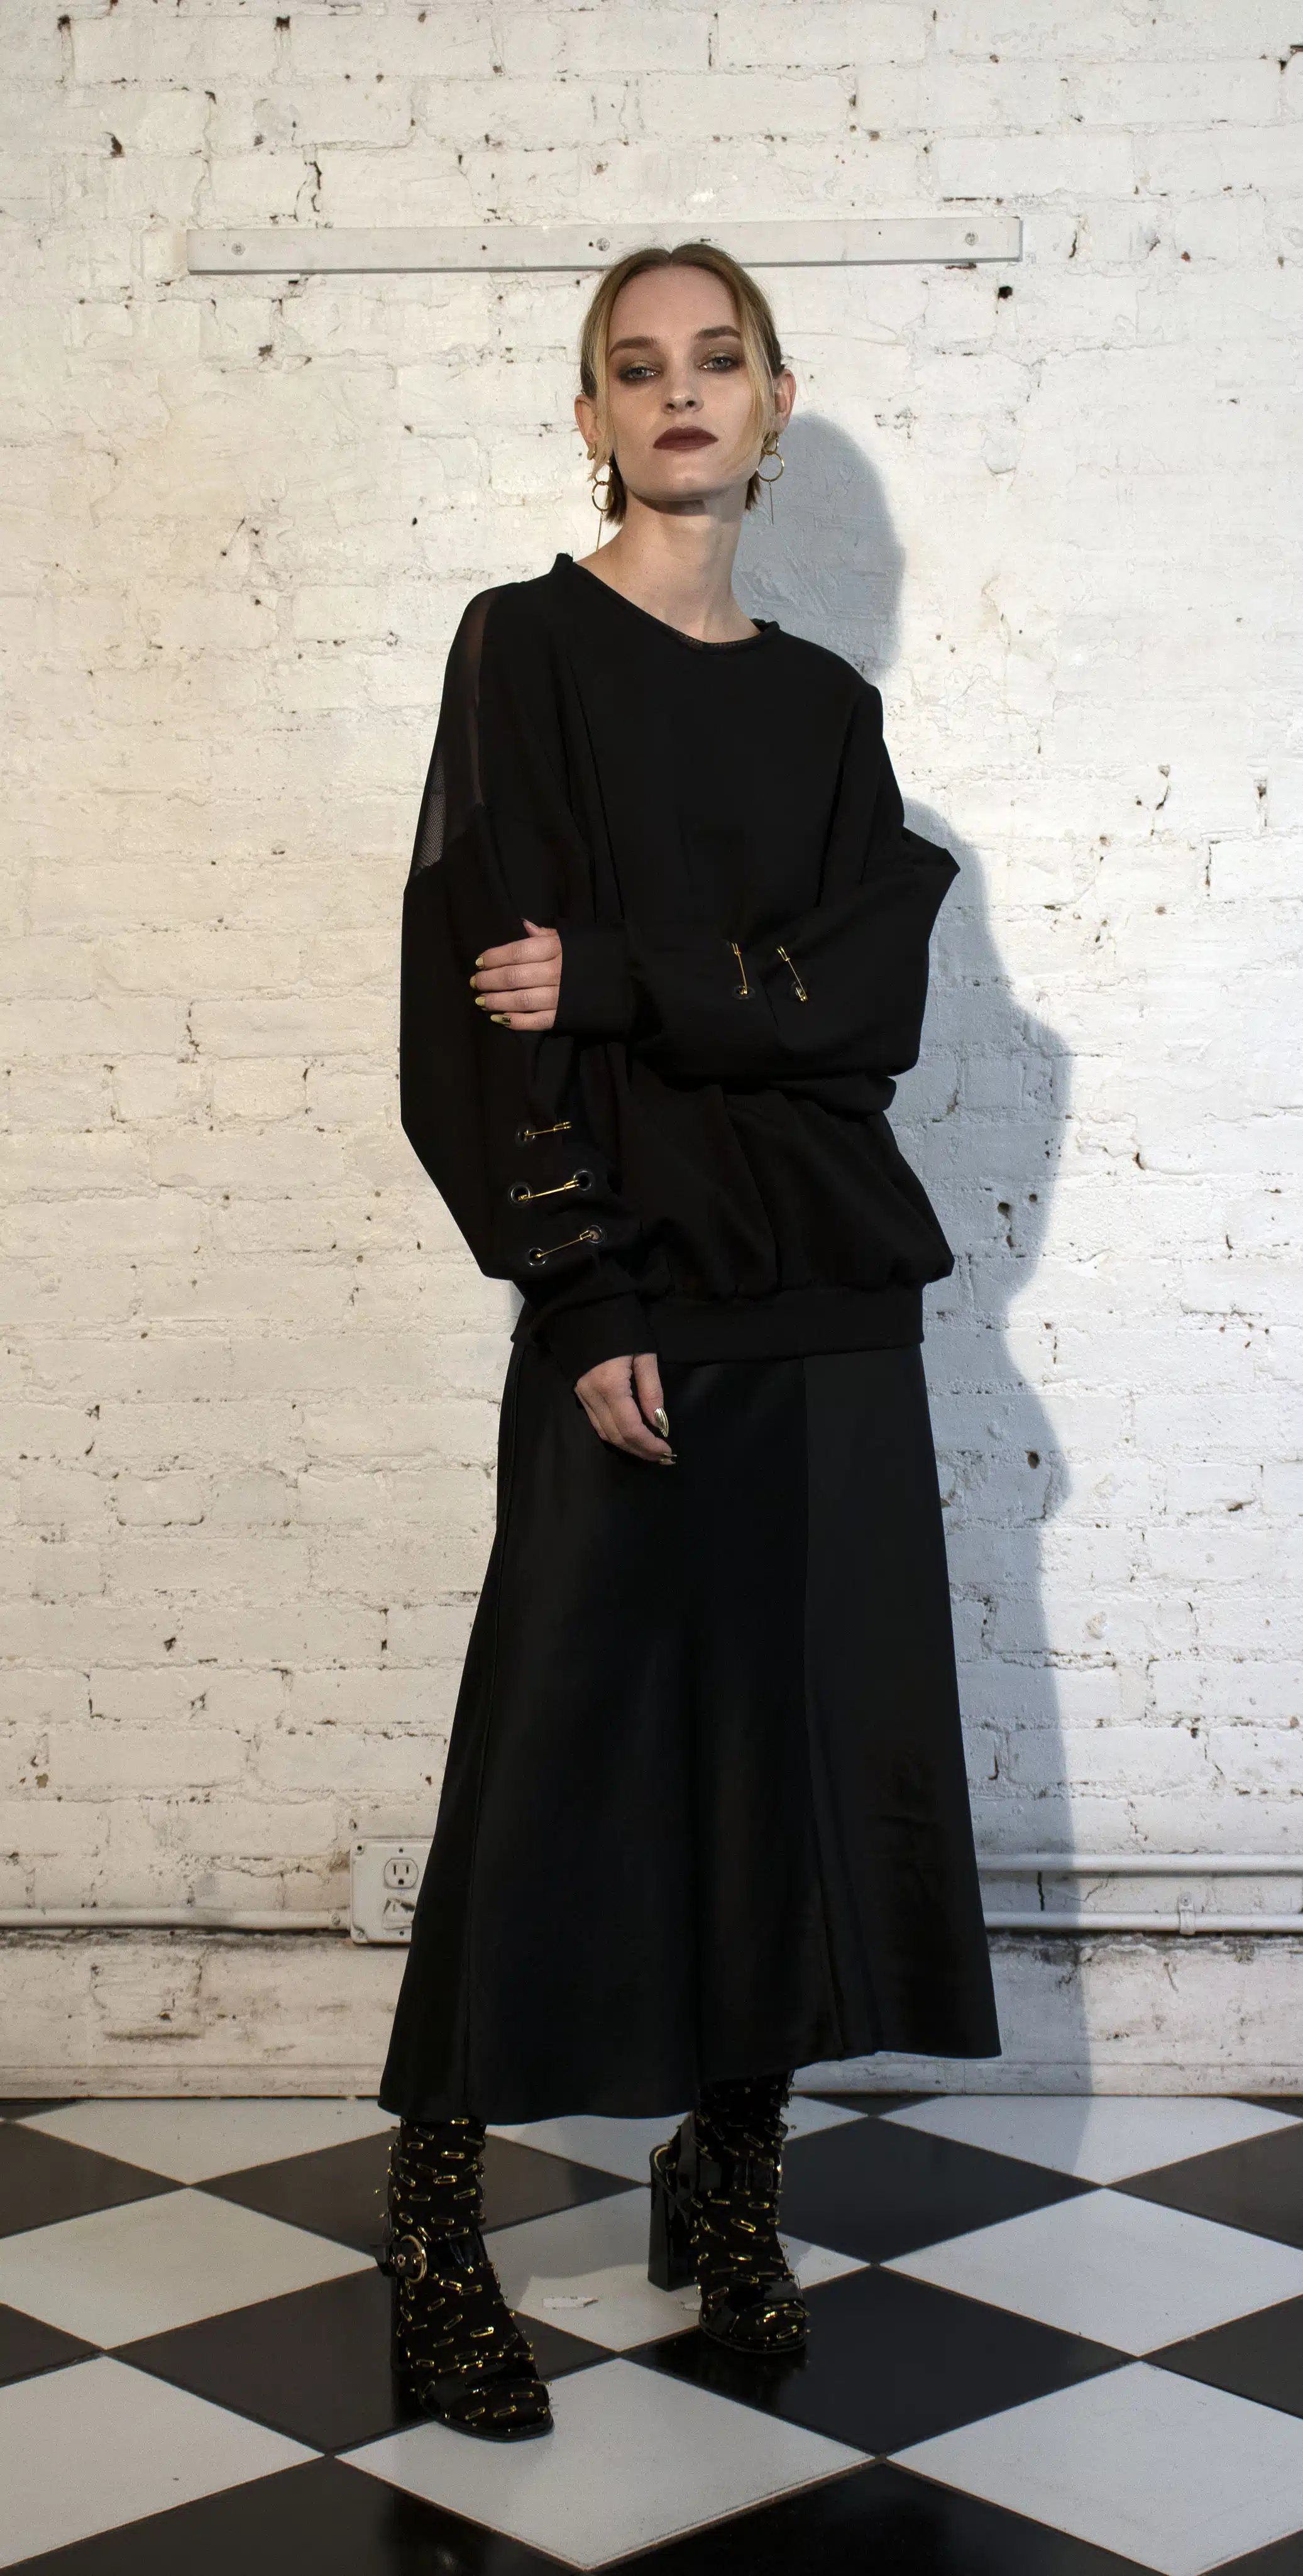 Image from FW19 Collection